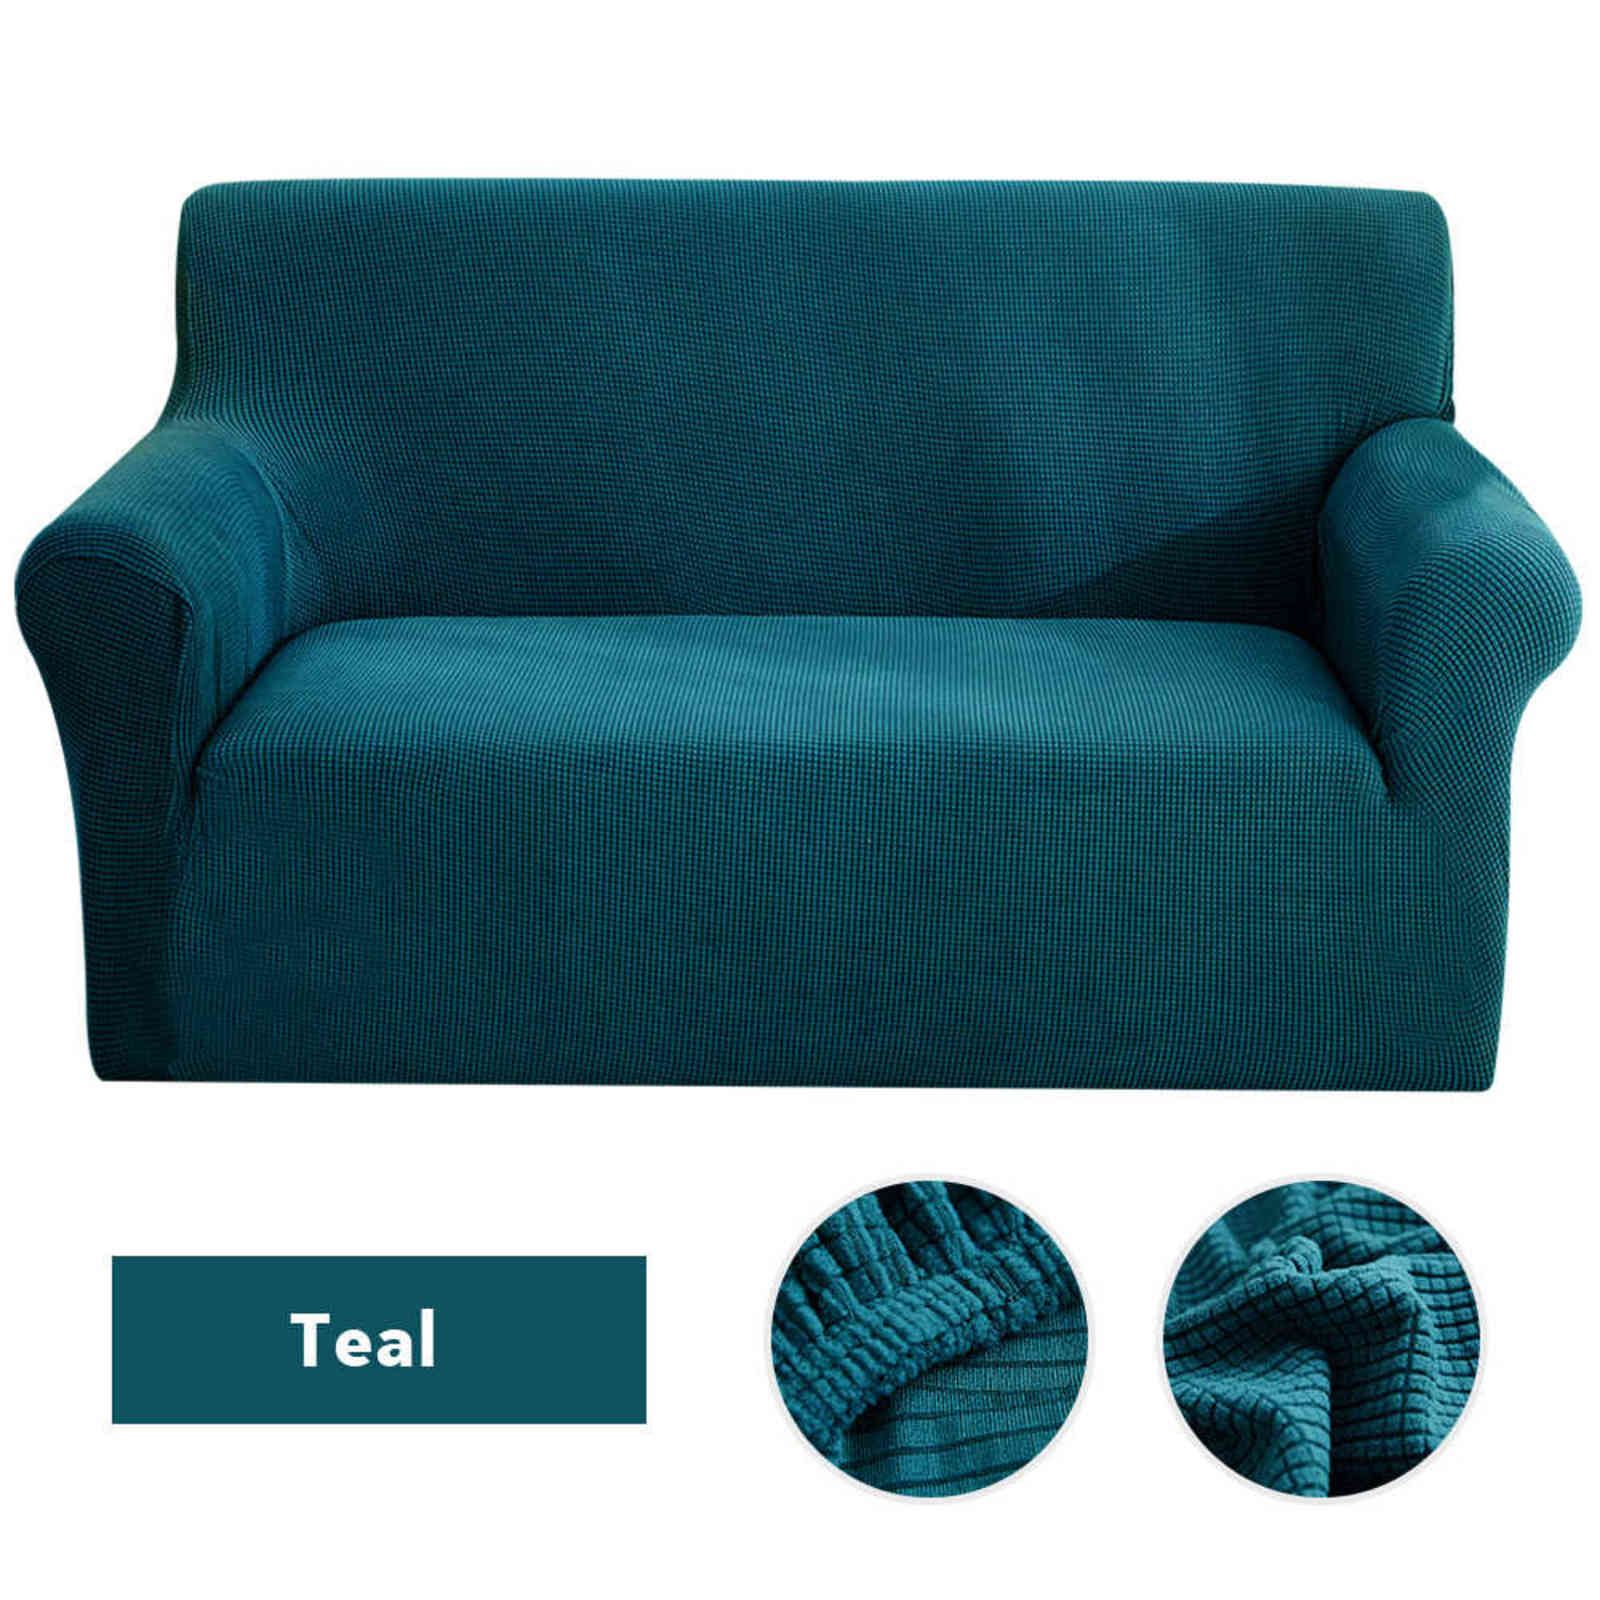 Teal-2-Seater (145-185cm)